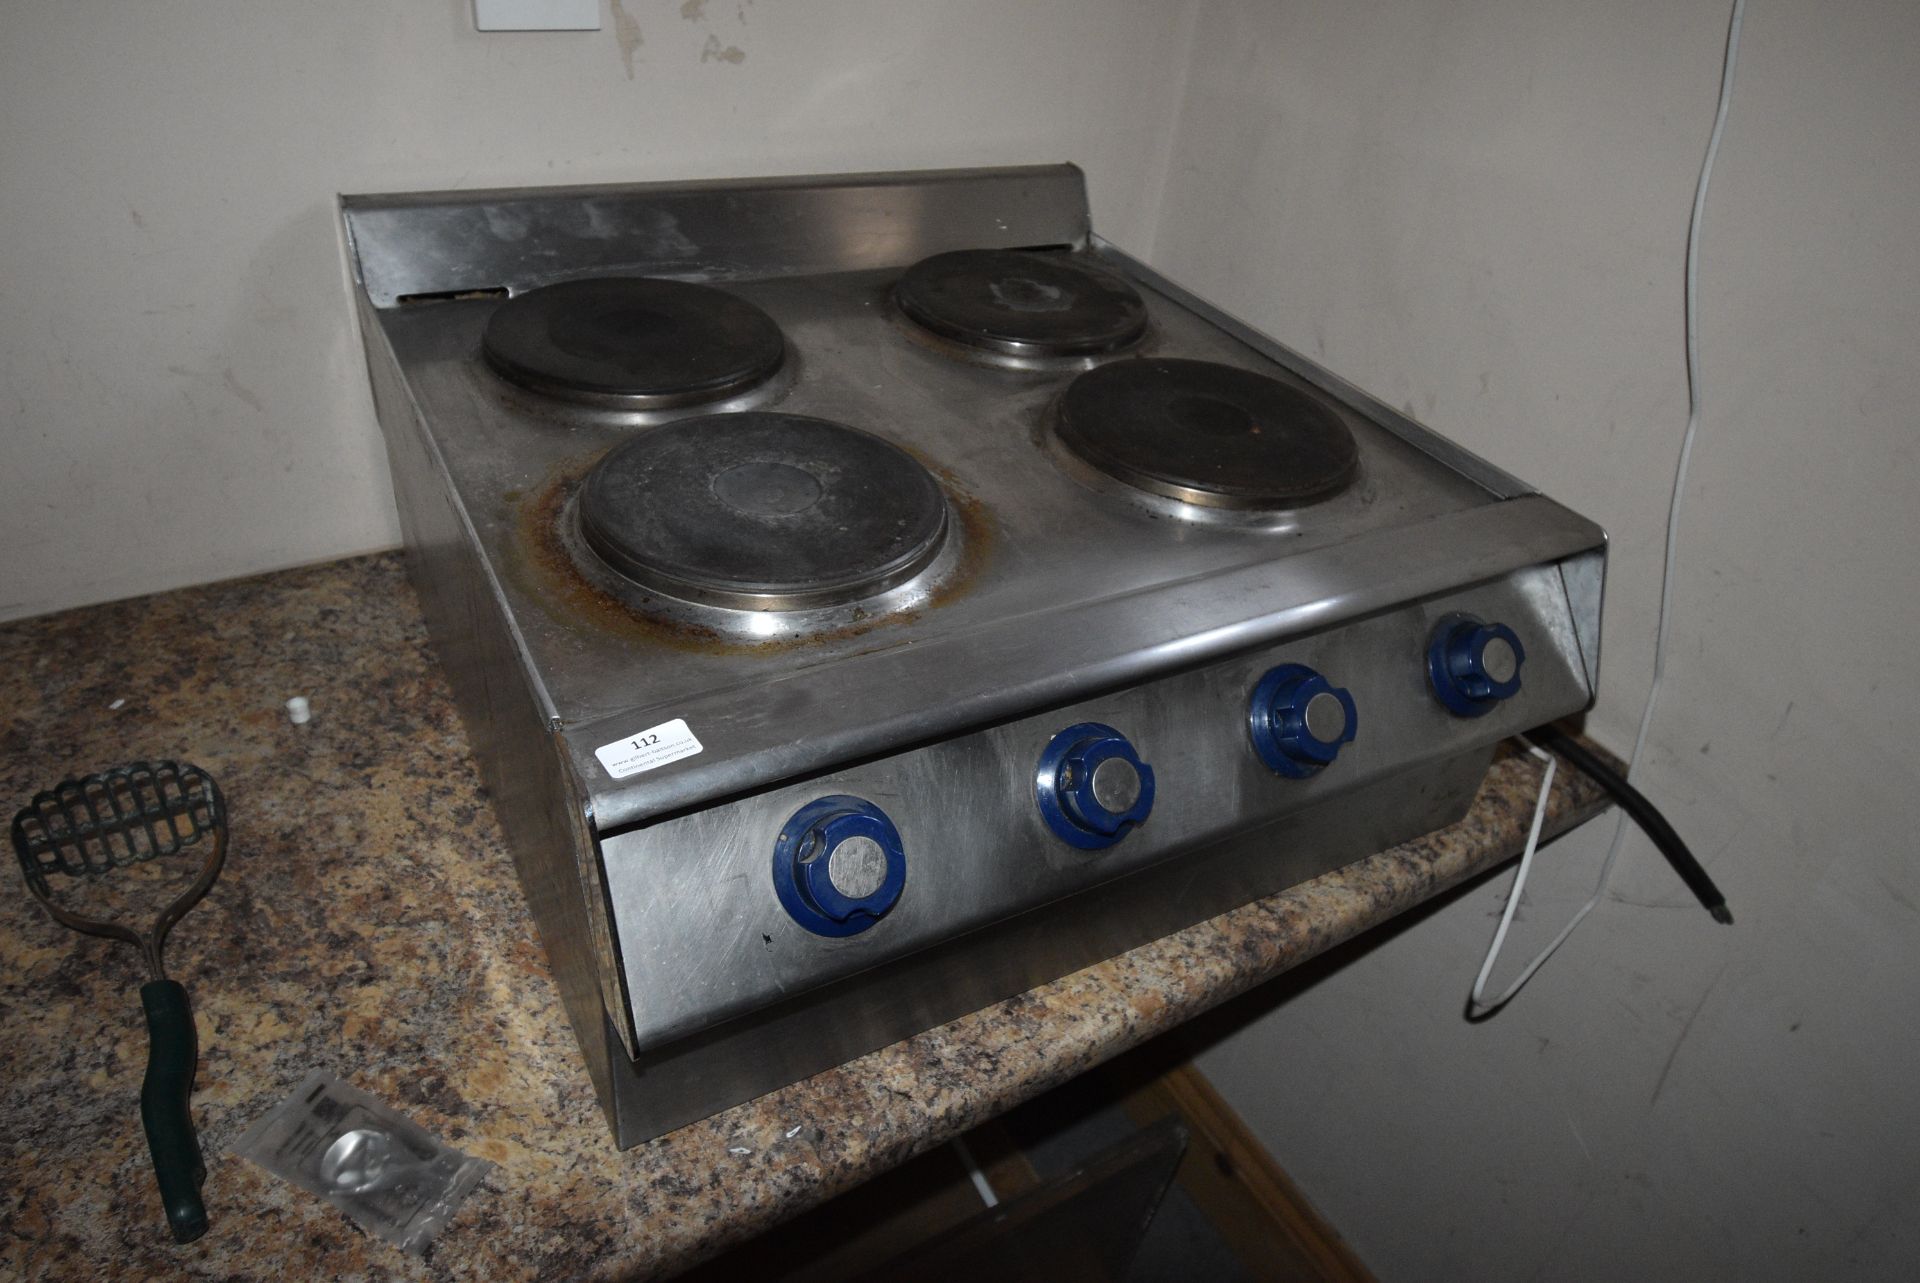 Four Ring Electric Hob